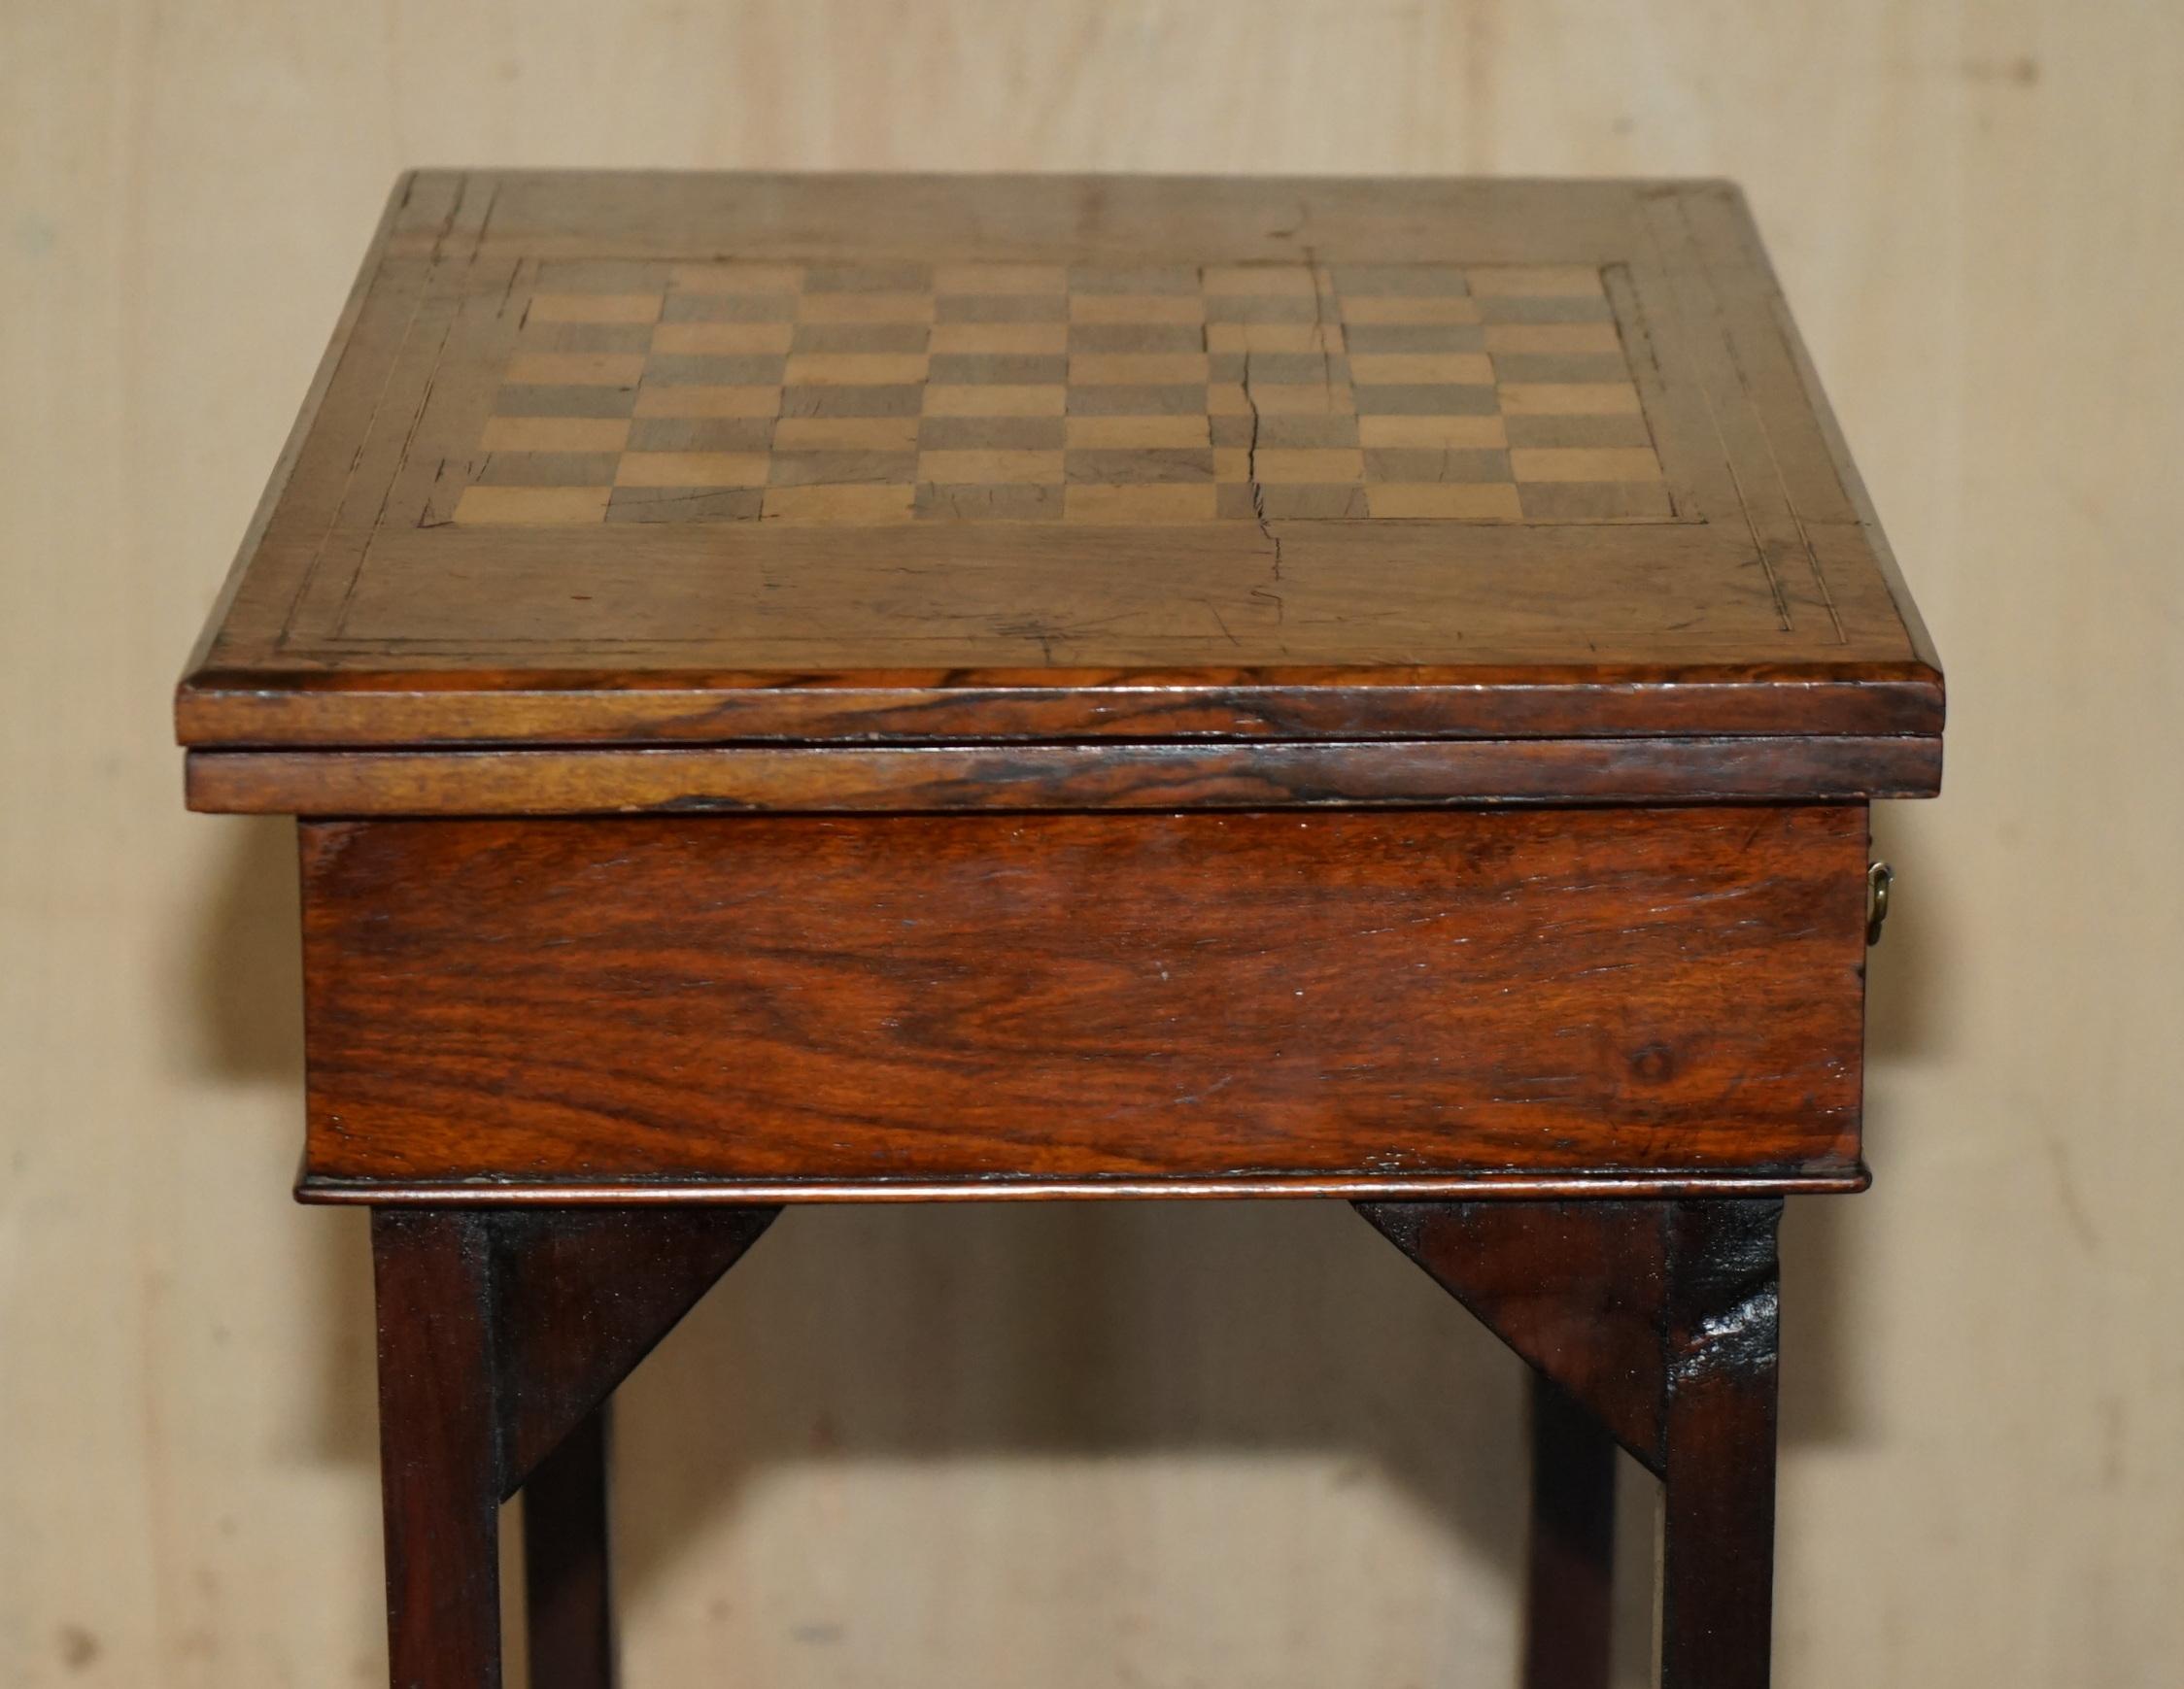 EXQUISITE WALNUT SATINWOOD & HARDWOOD ANTIQUE ViCTORIAN CHESSBOARD GAMES TABLE For Sale 3